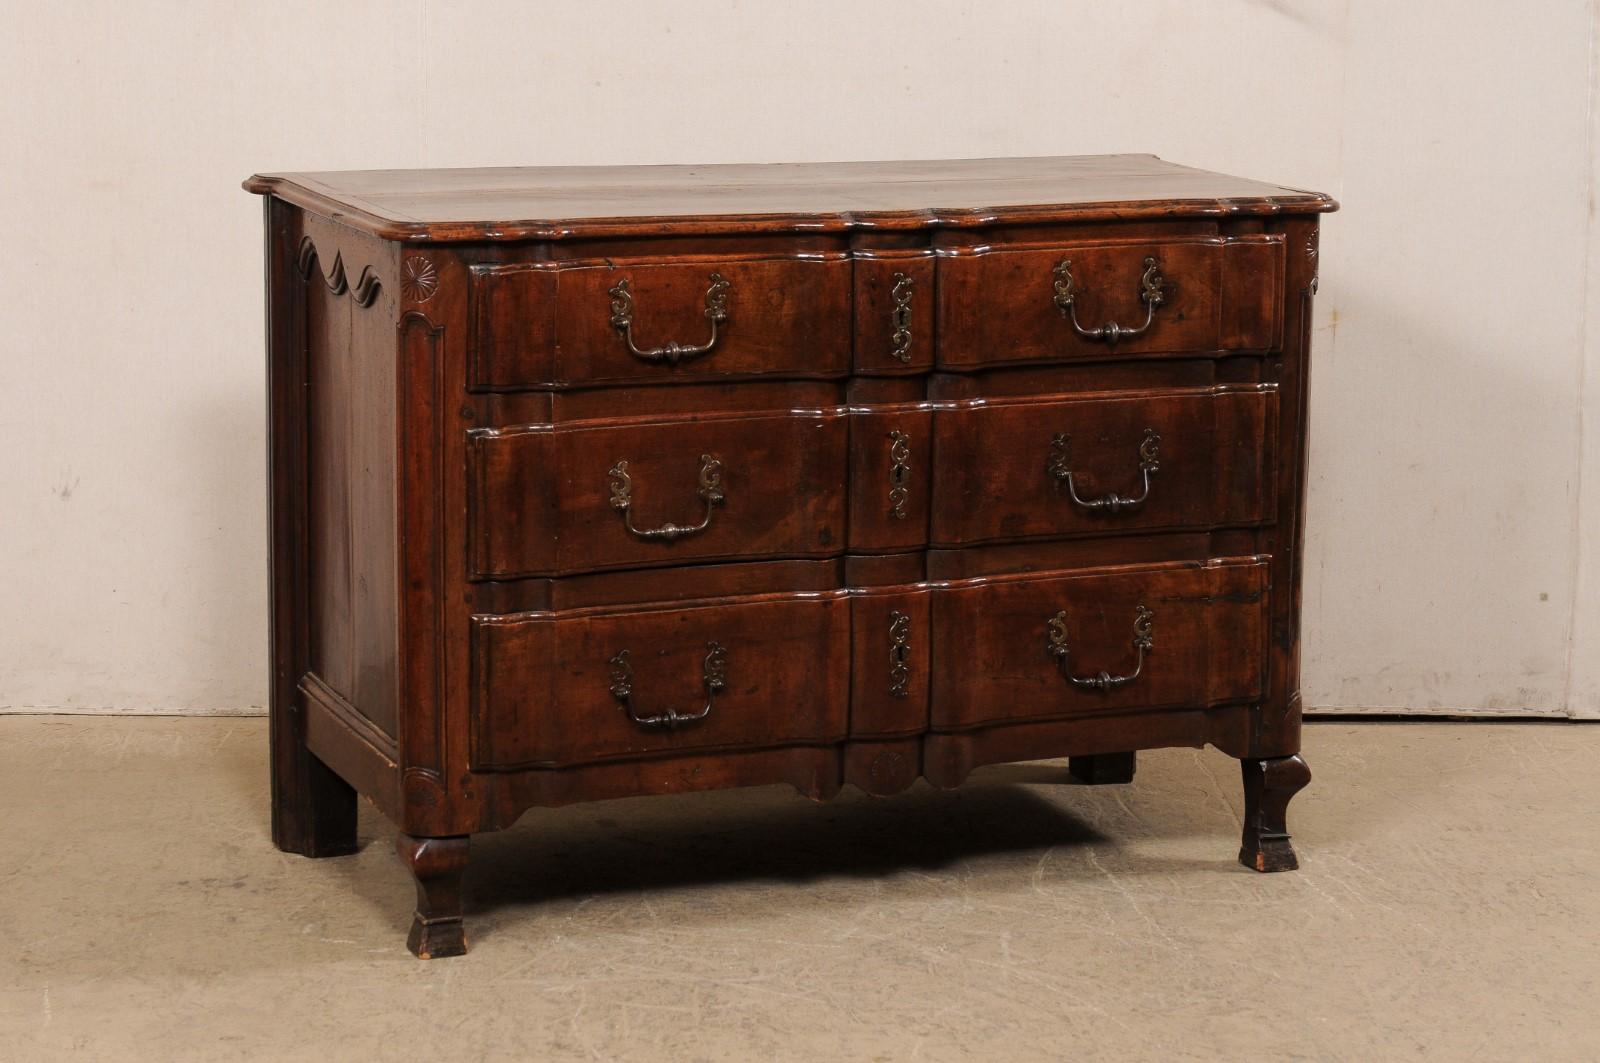 A French Regence period beautifully-carved walnut chest of drawers, with its original hardware, from the 18th century. This gorgeous antique commode from France has been exquisitely carved with a serpentine 'linen-fold' design which goes from the